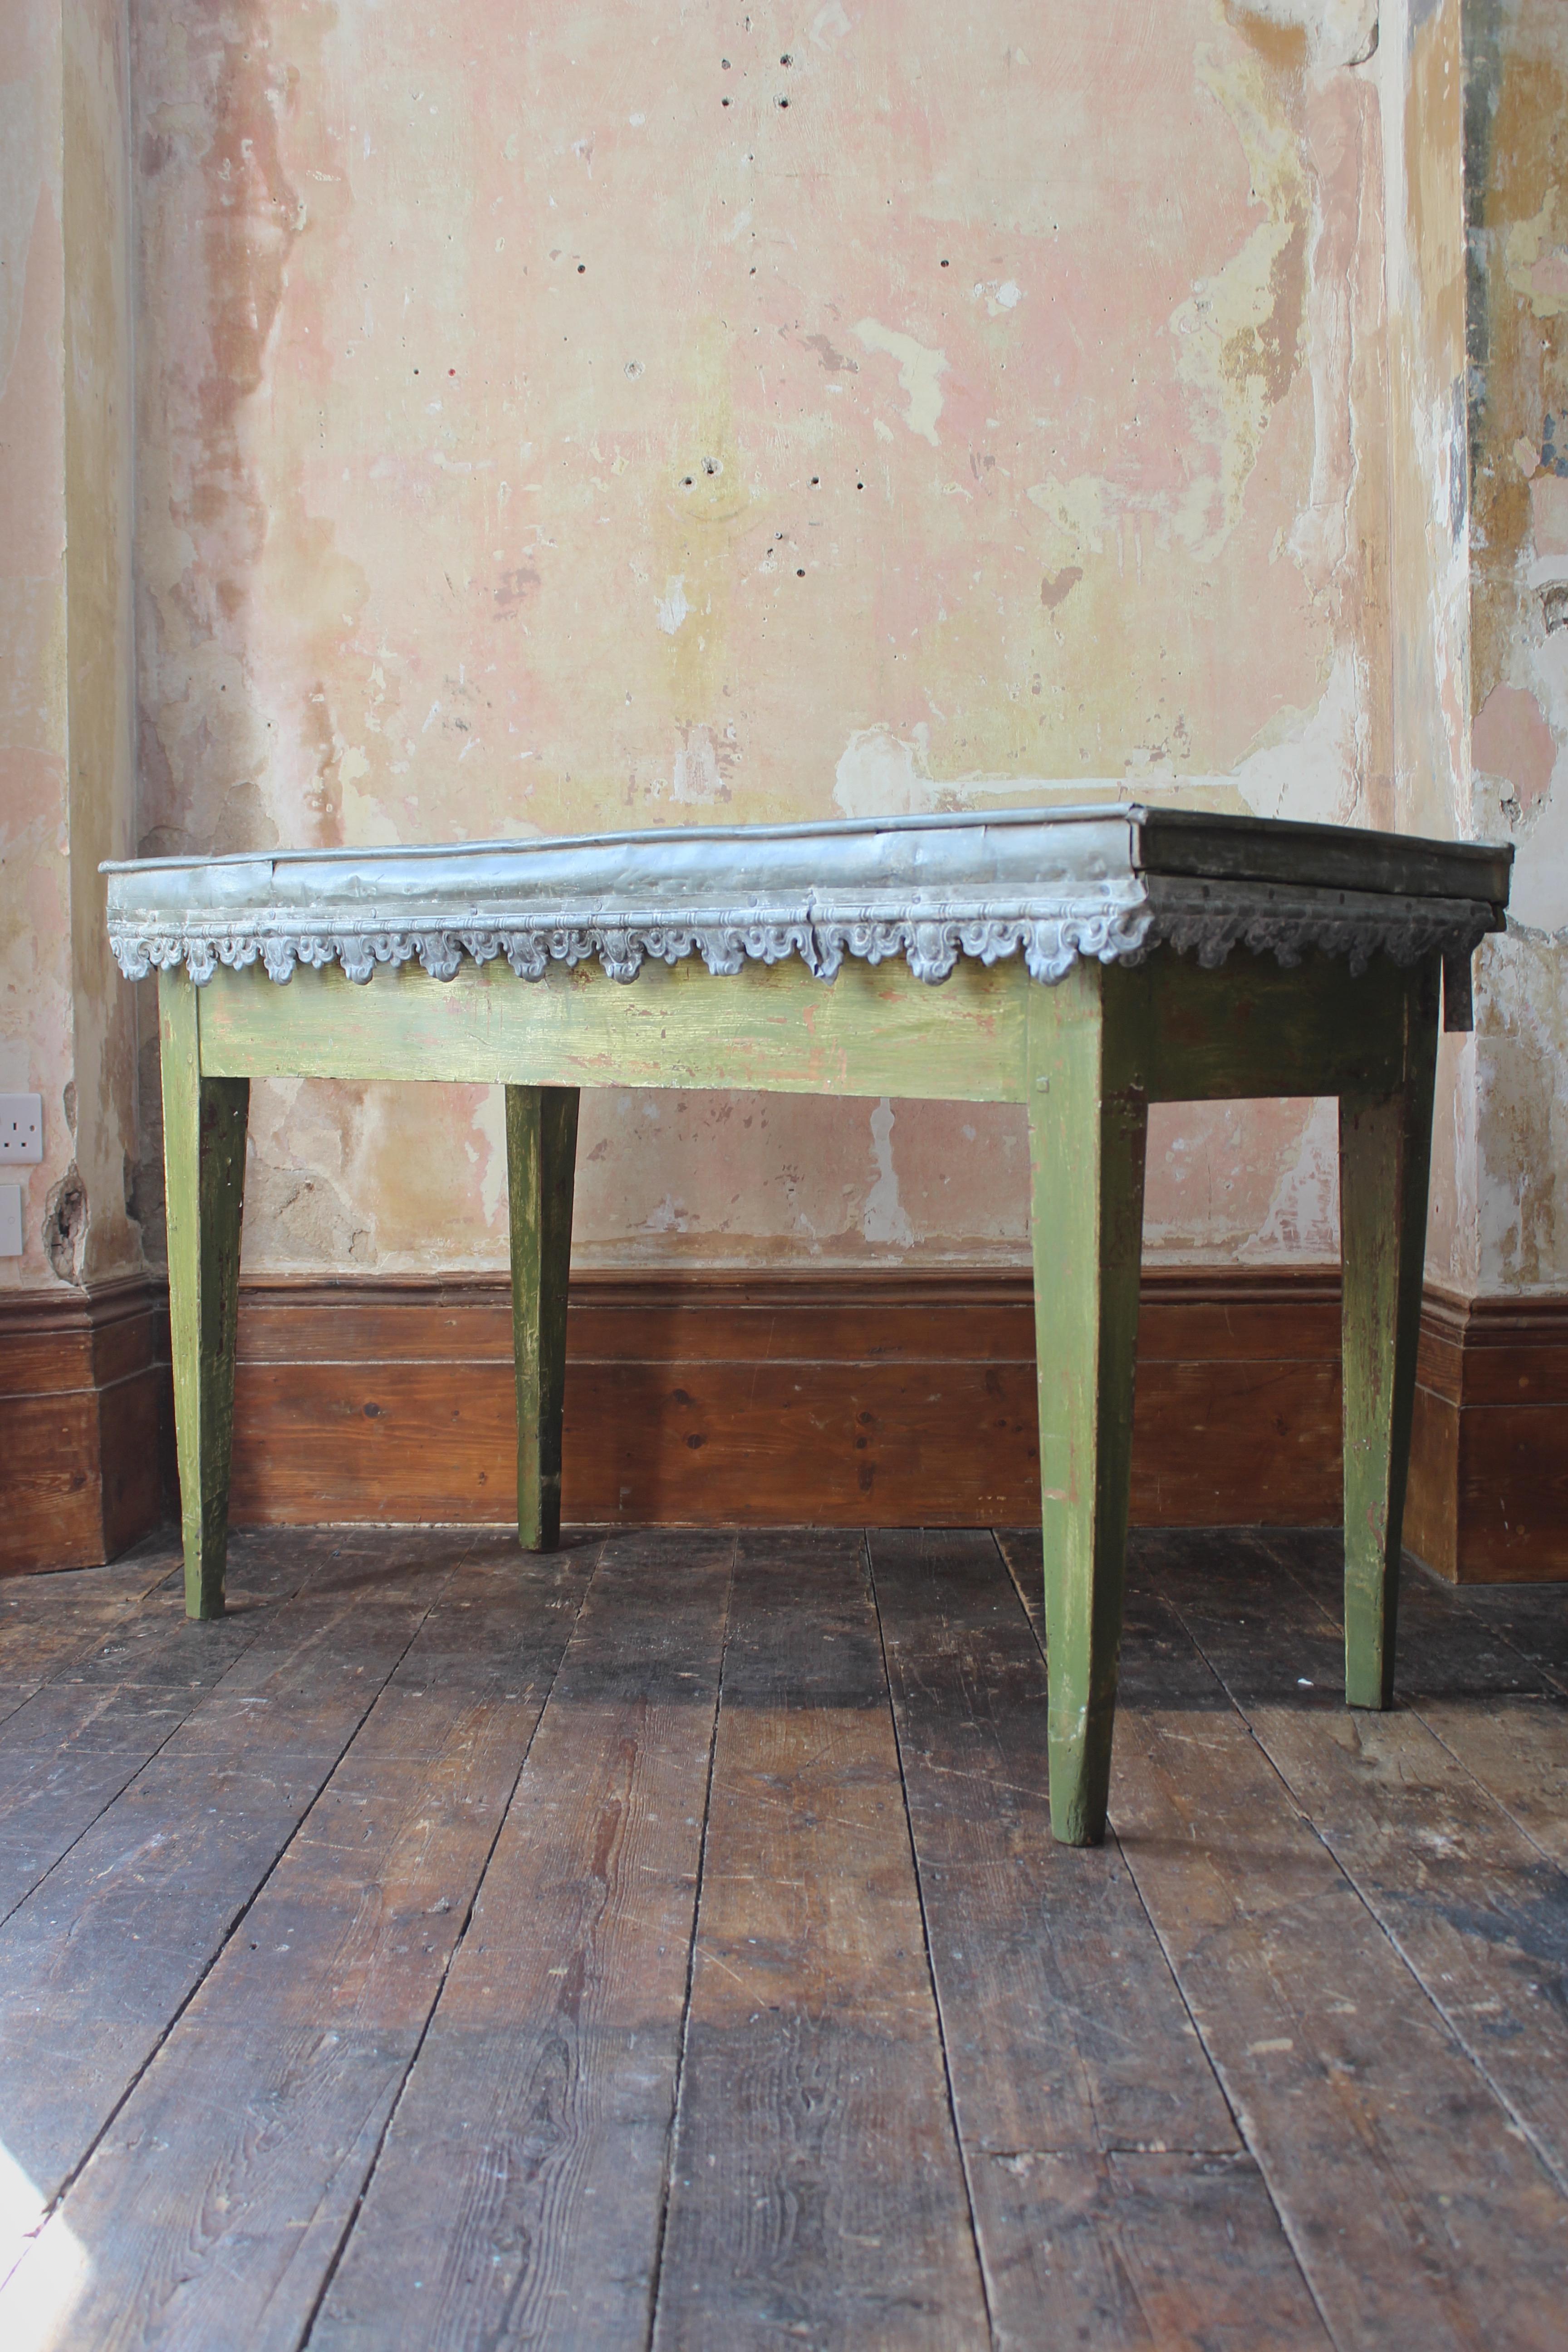 Early 20th Century English Country House Zinc Orangery Potting Garden Table  11